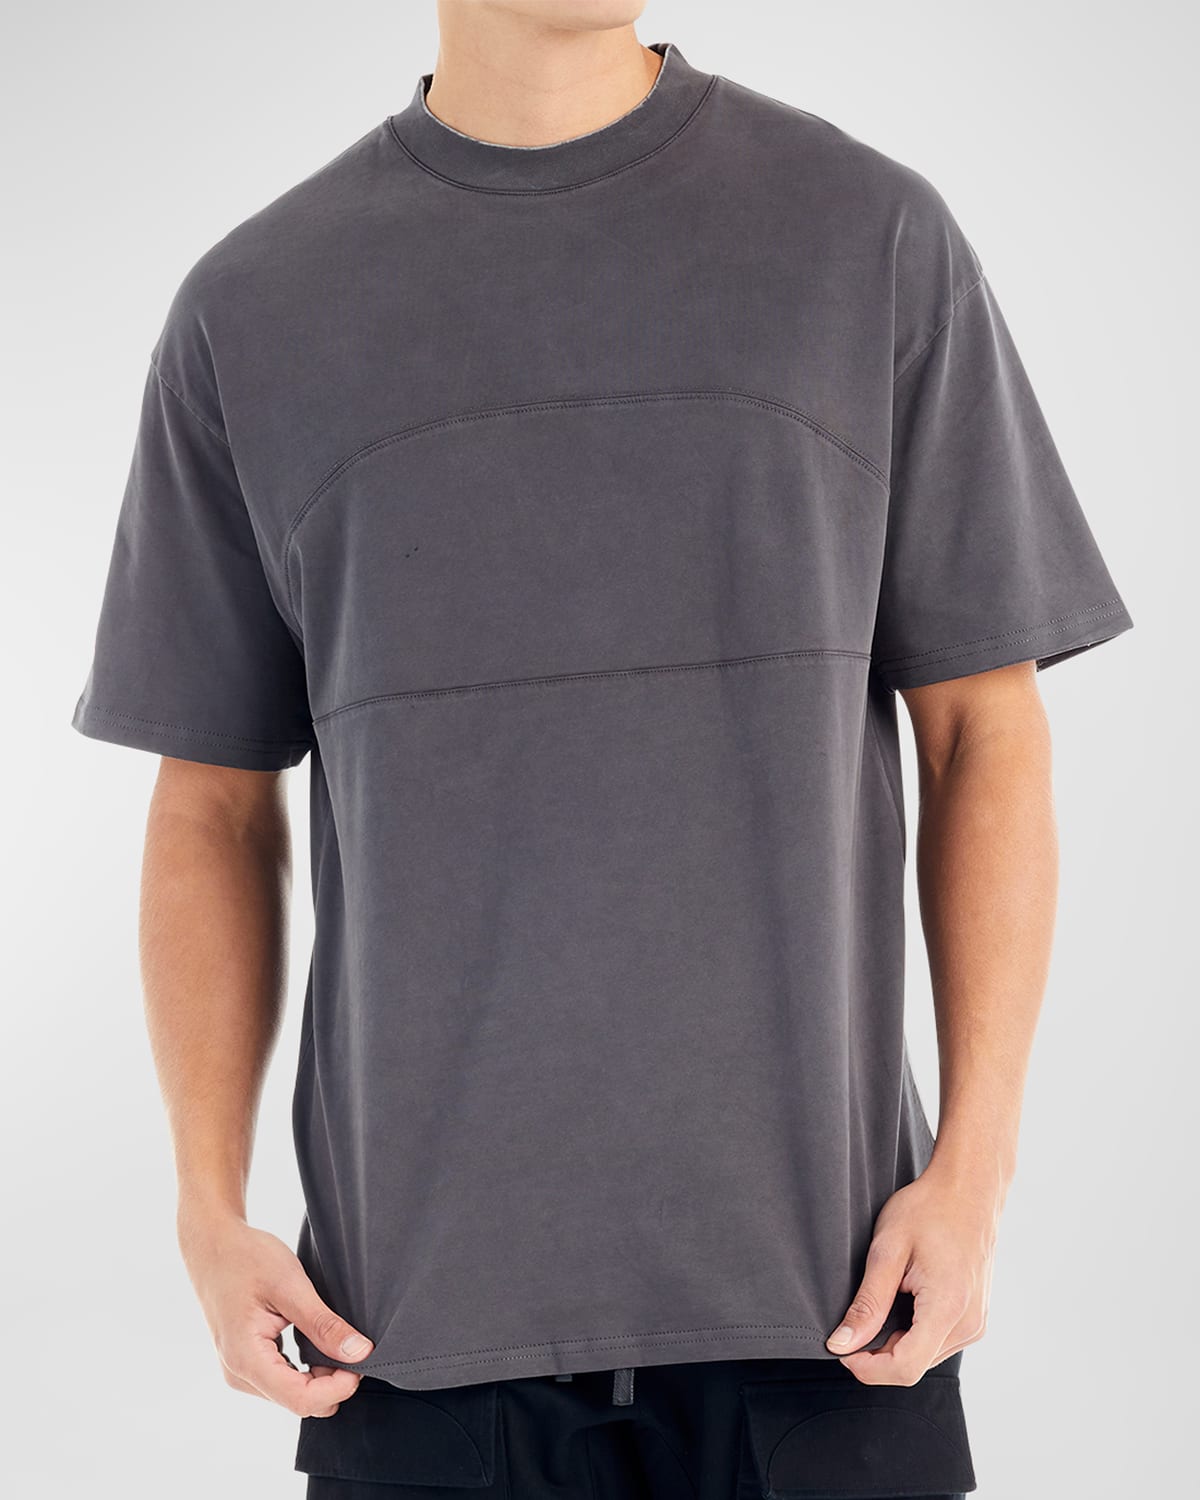 Men's Washed T-Shirt with Center Seam